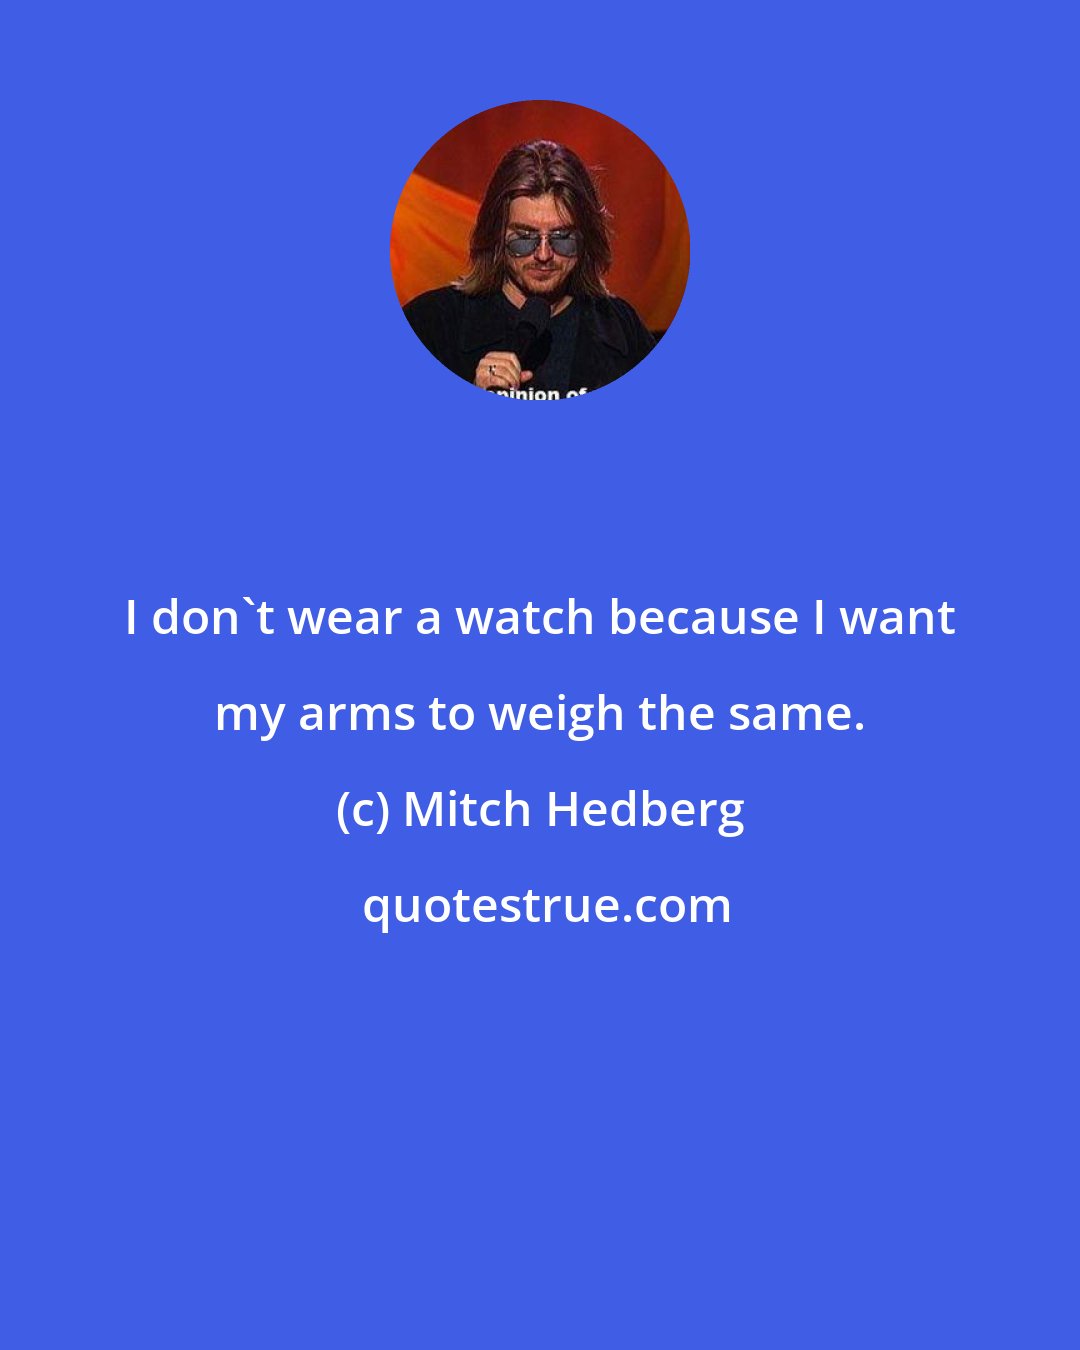 Mitch Hedberg: I don't wear a watch because I want my arms to weigh the same.